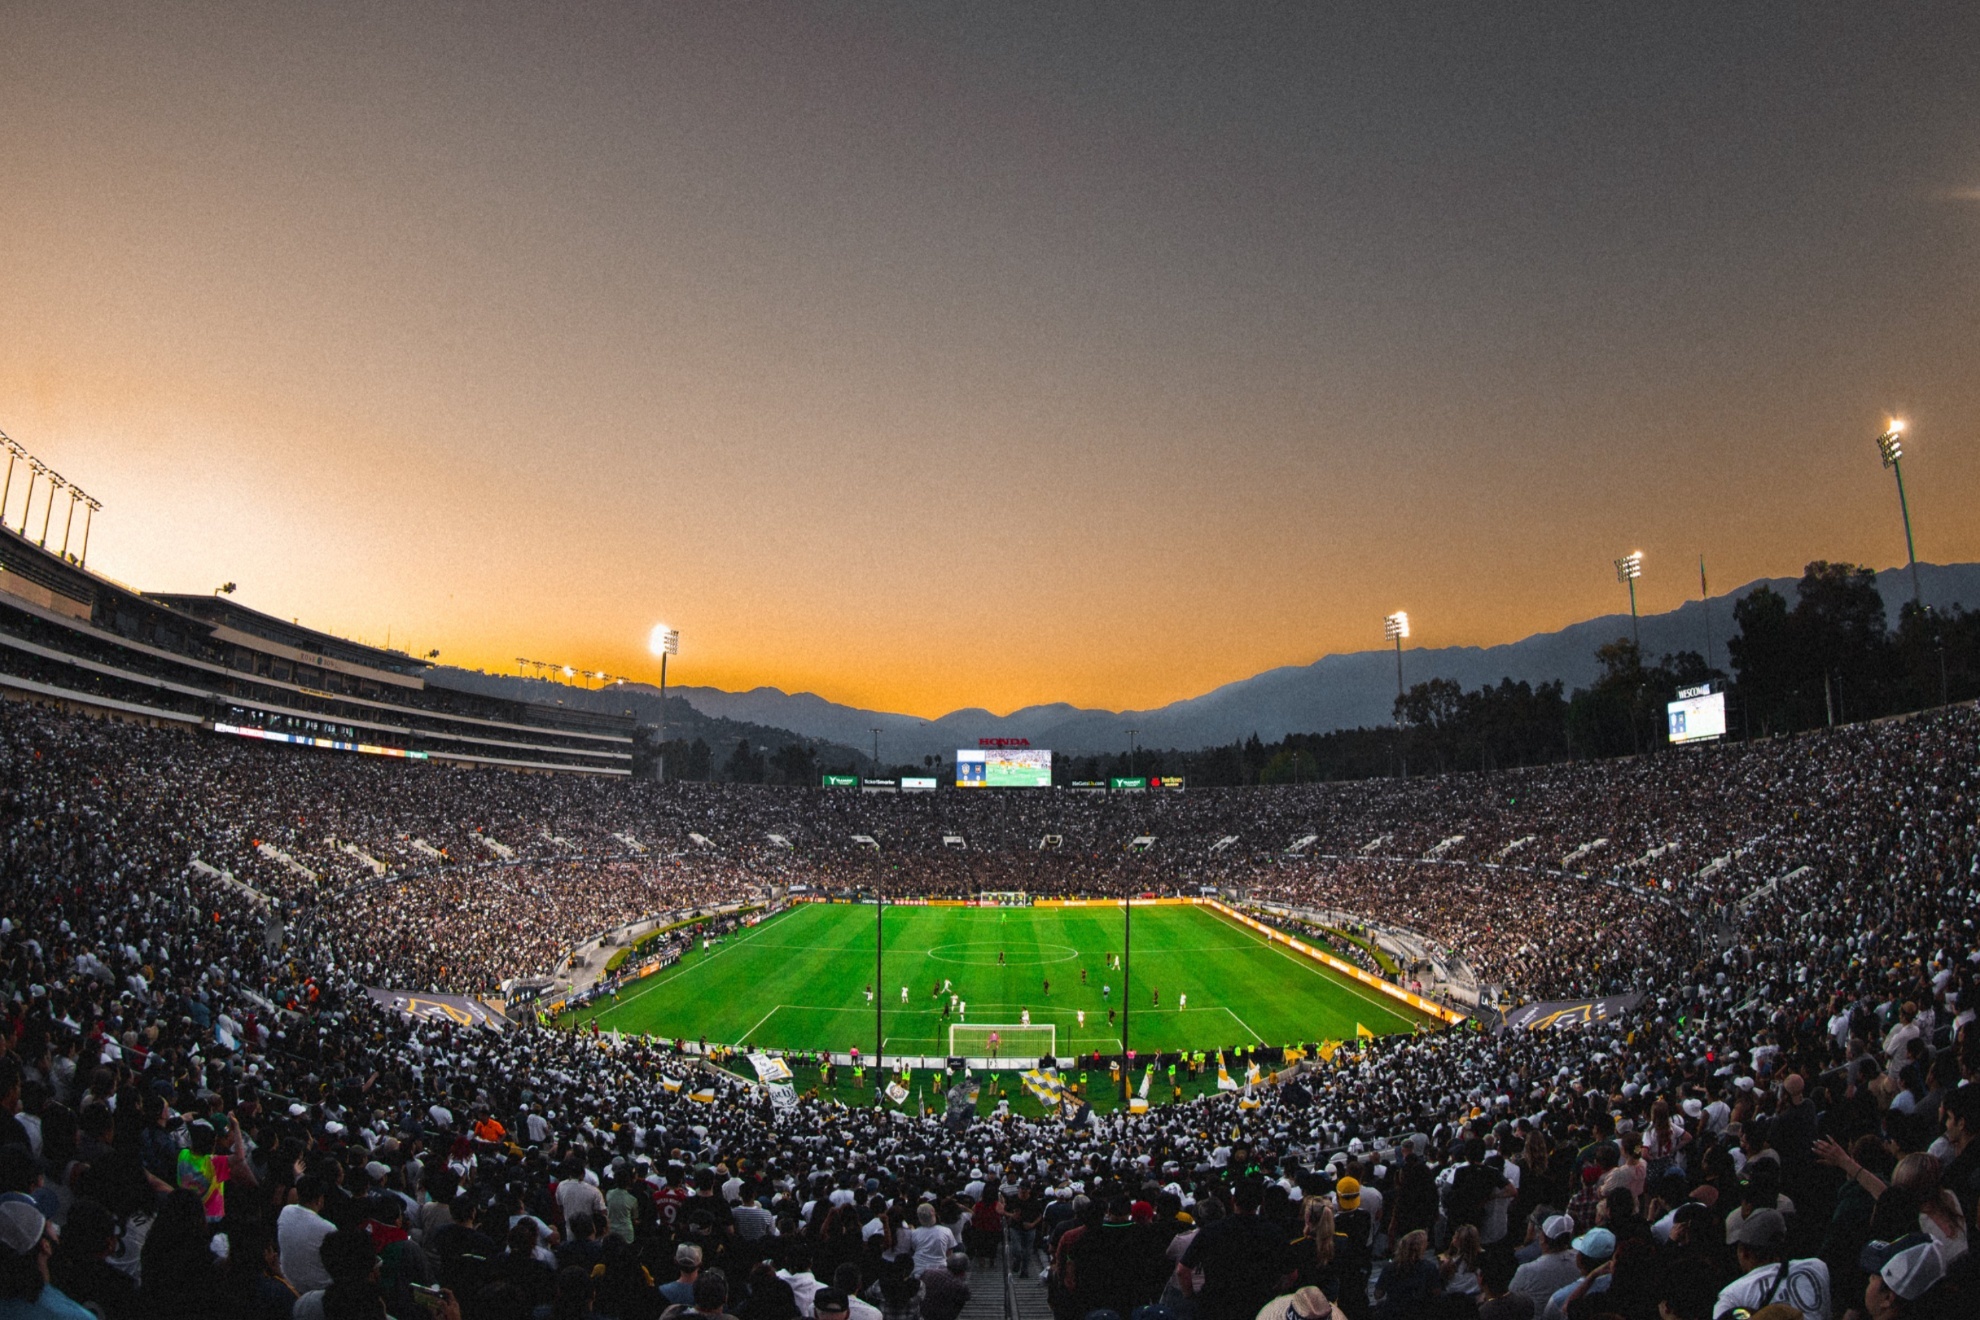 More than 82,000 fans showed up for El Trafico game at the Rose Bowl